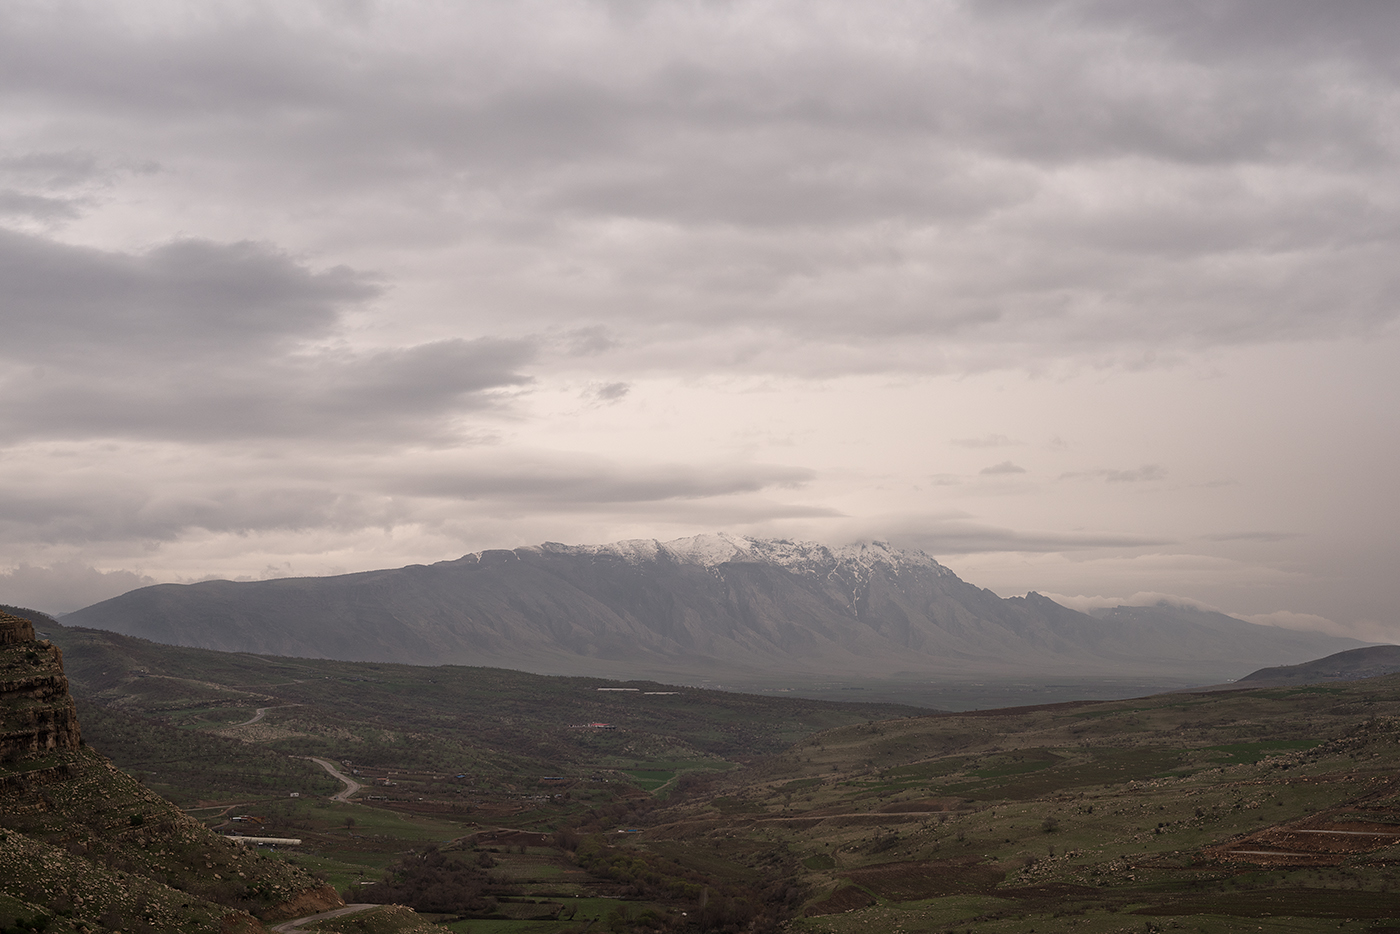 {quote}We have no friends but the mountains{quote}; an oft-repeated Kurdish motto, expresses one of the great lonely truths for the Kurds.  Kurdistan is a place that does not yet exist for the 40 million Kurds living in the world today.